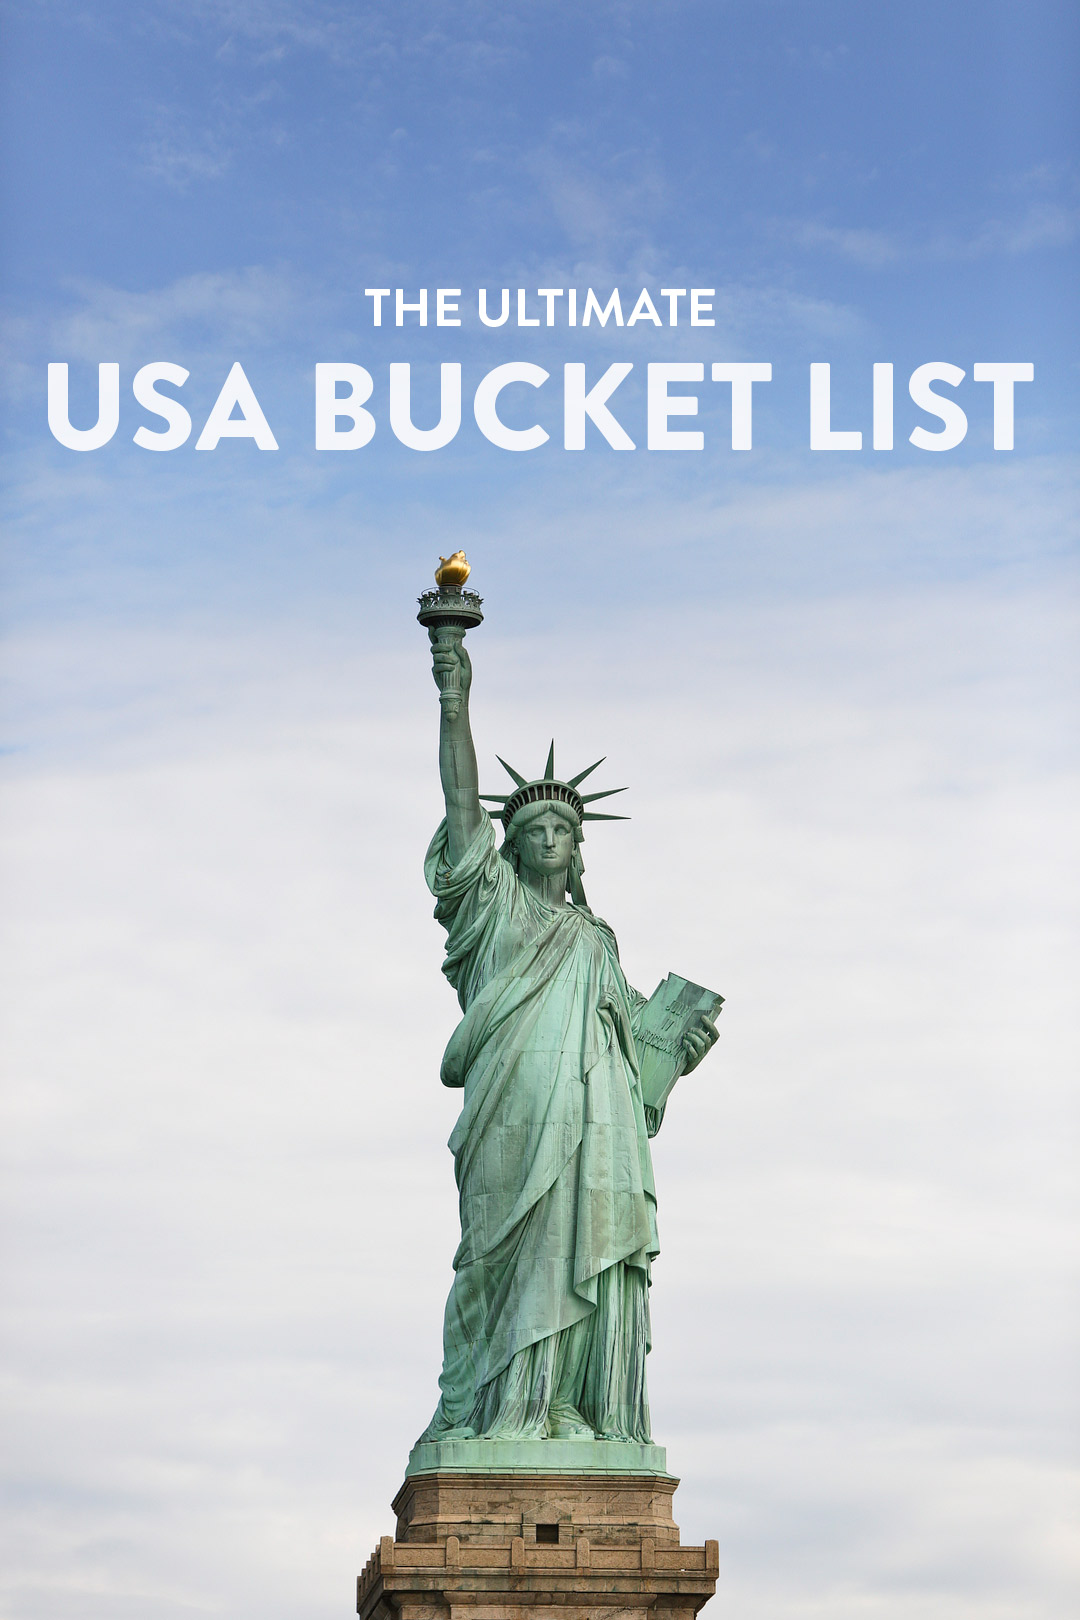 Your Ultimate USA Bucket List - 101 Places to Visit in USA